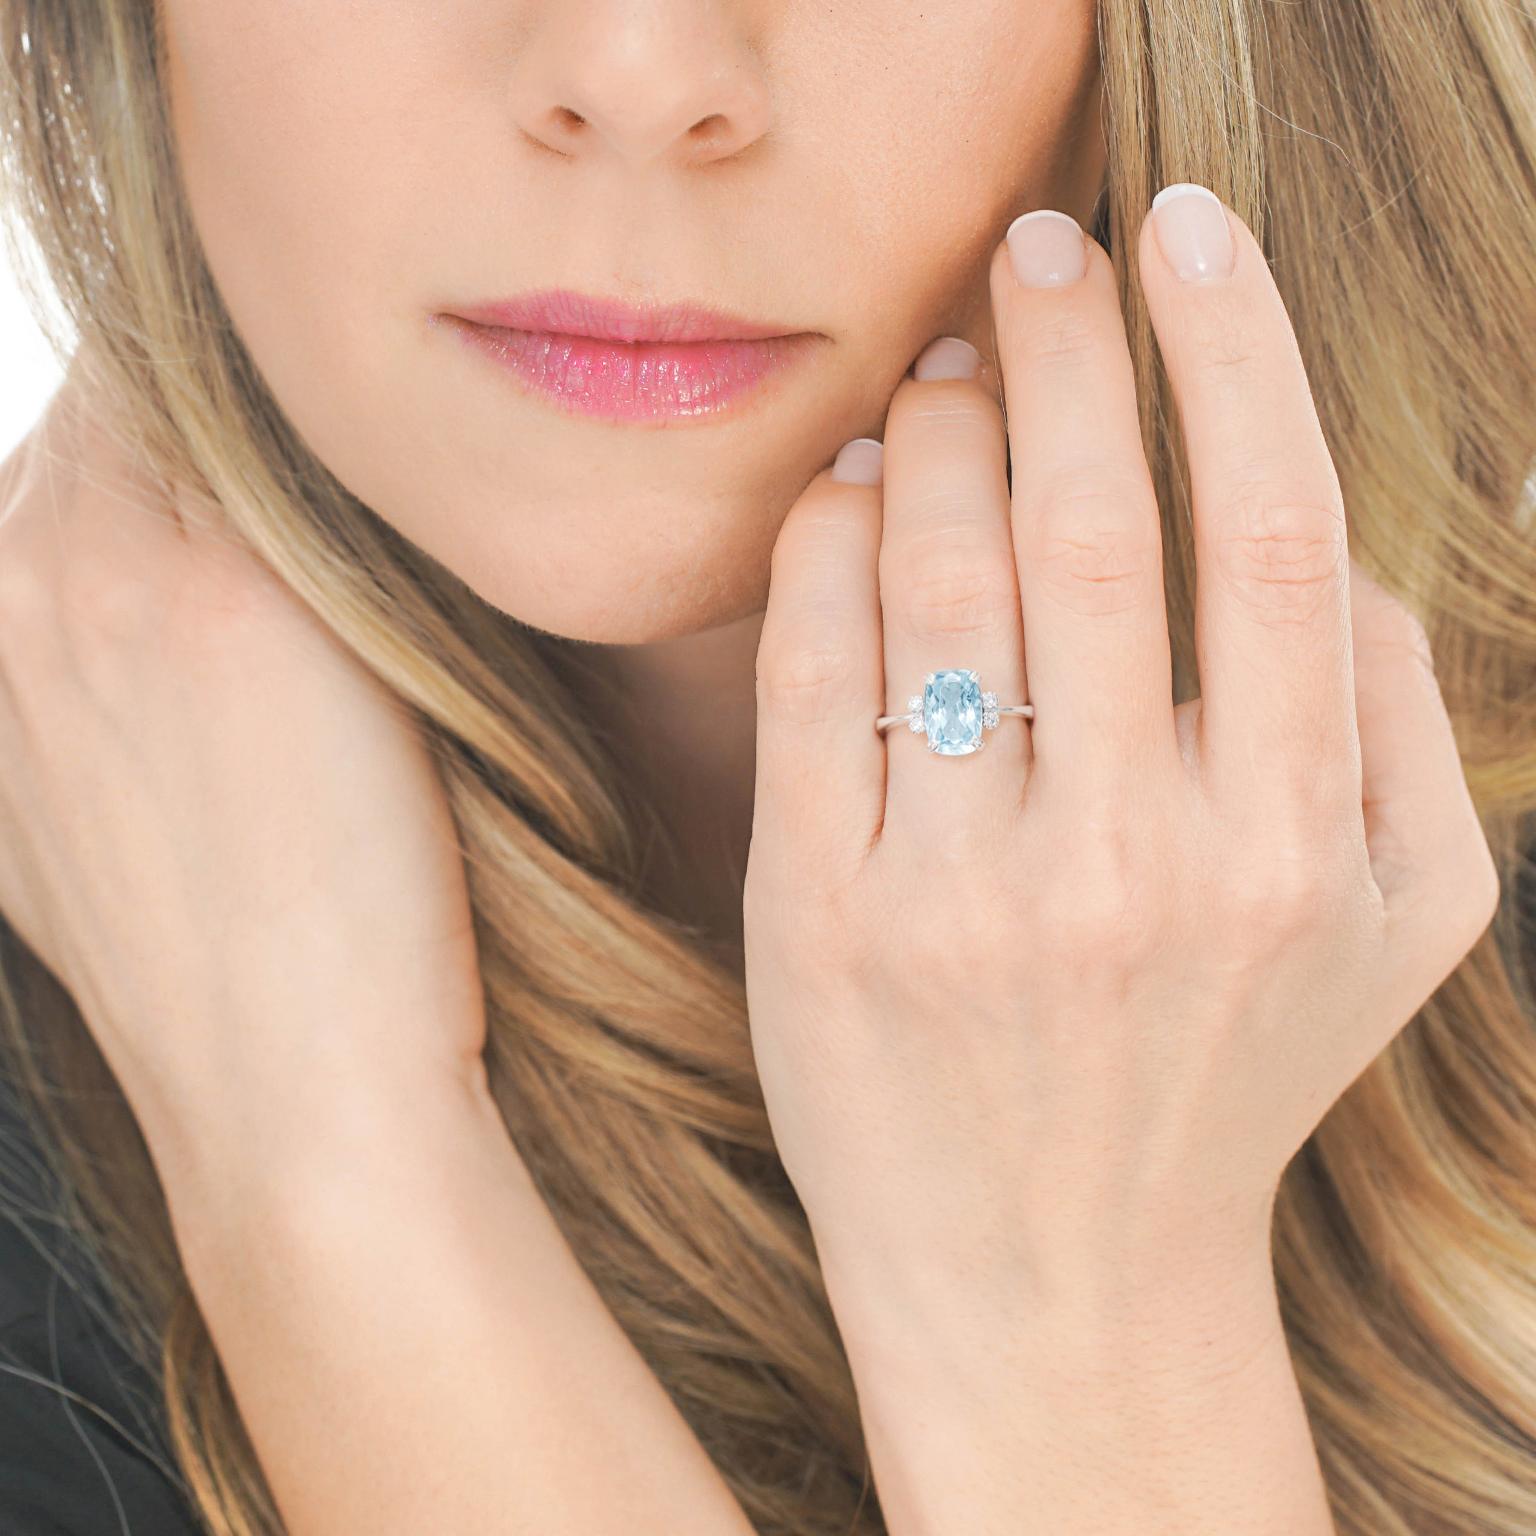 Circa 1980s, 18k, by H. Stern, Brazil.  Set with a brilliant blue 2.0 carat aquamarine, this eighteen-karat ring by H. Stern is tastefully chic with understated glamour.  Renowned for their fine design, superb quality, and especially for their